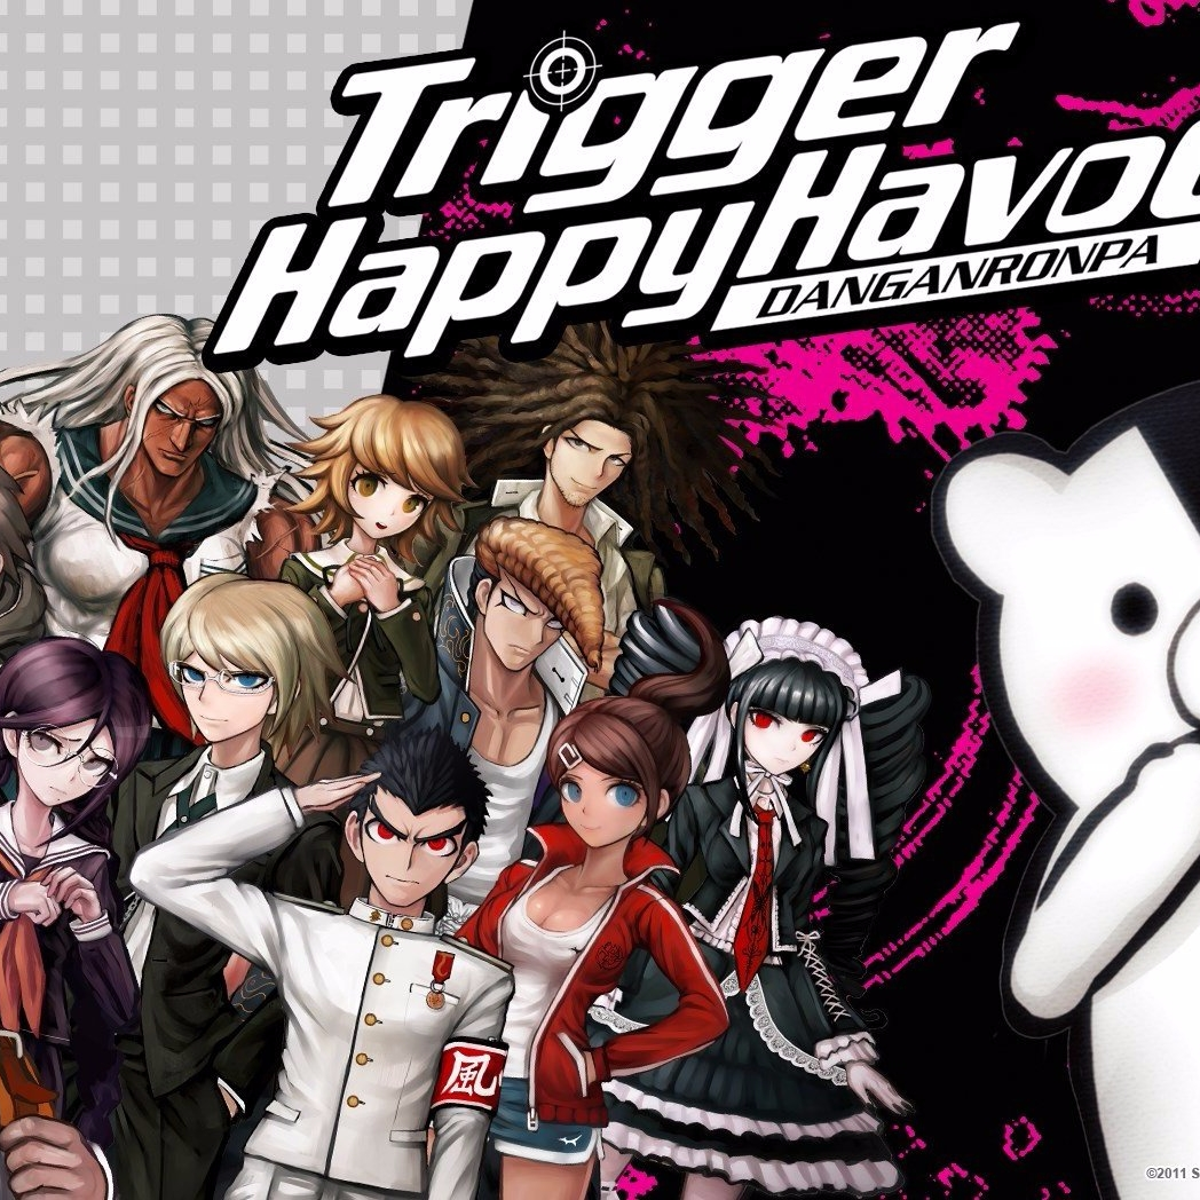 Why is Danganronpa so viciously appealing? | Eurogamer.net